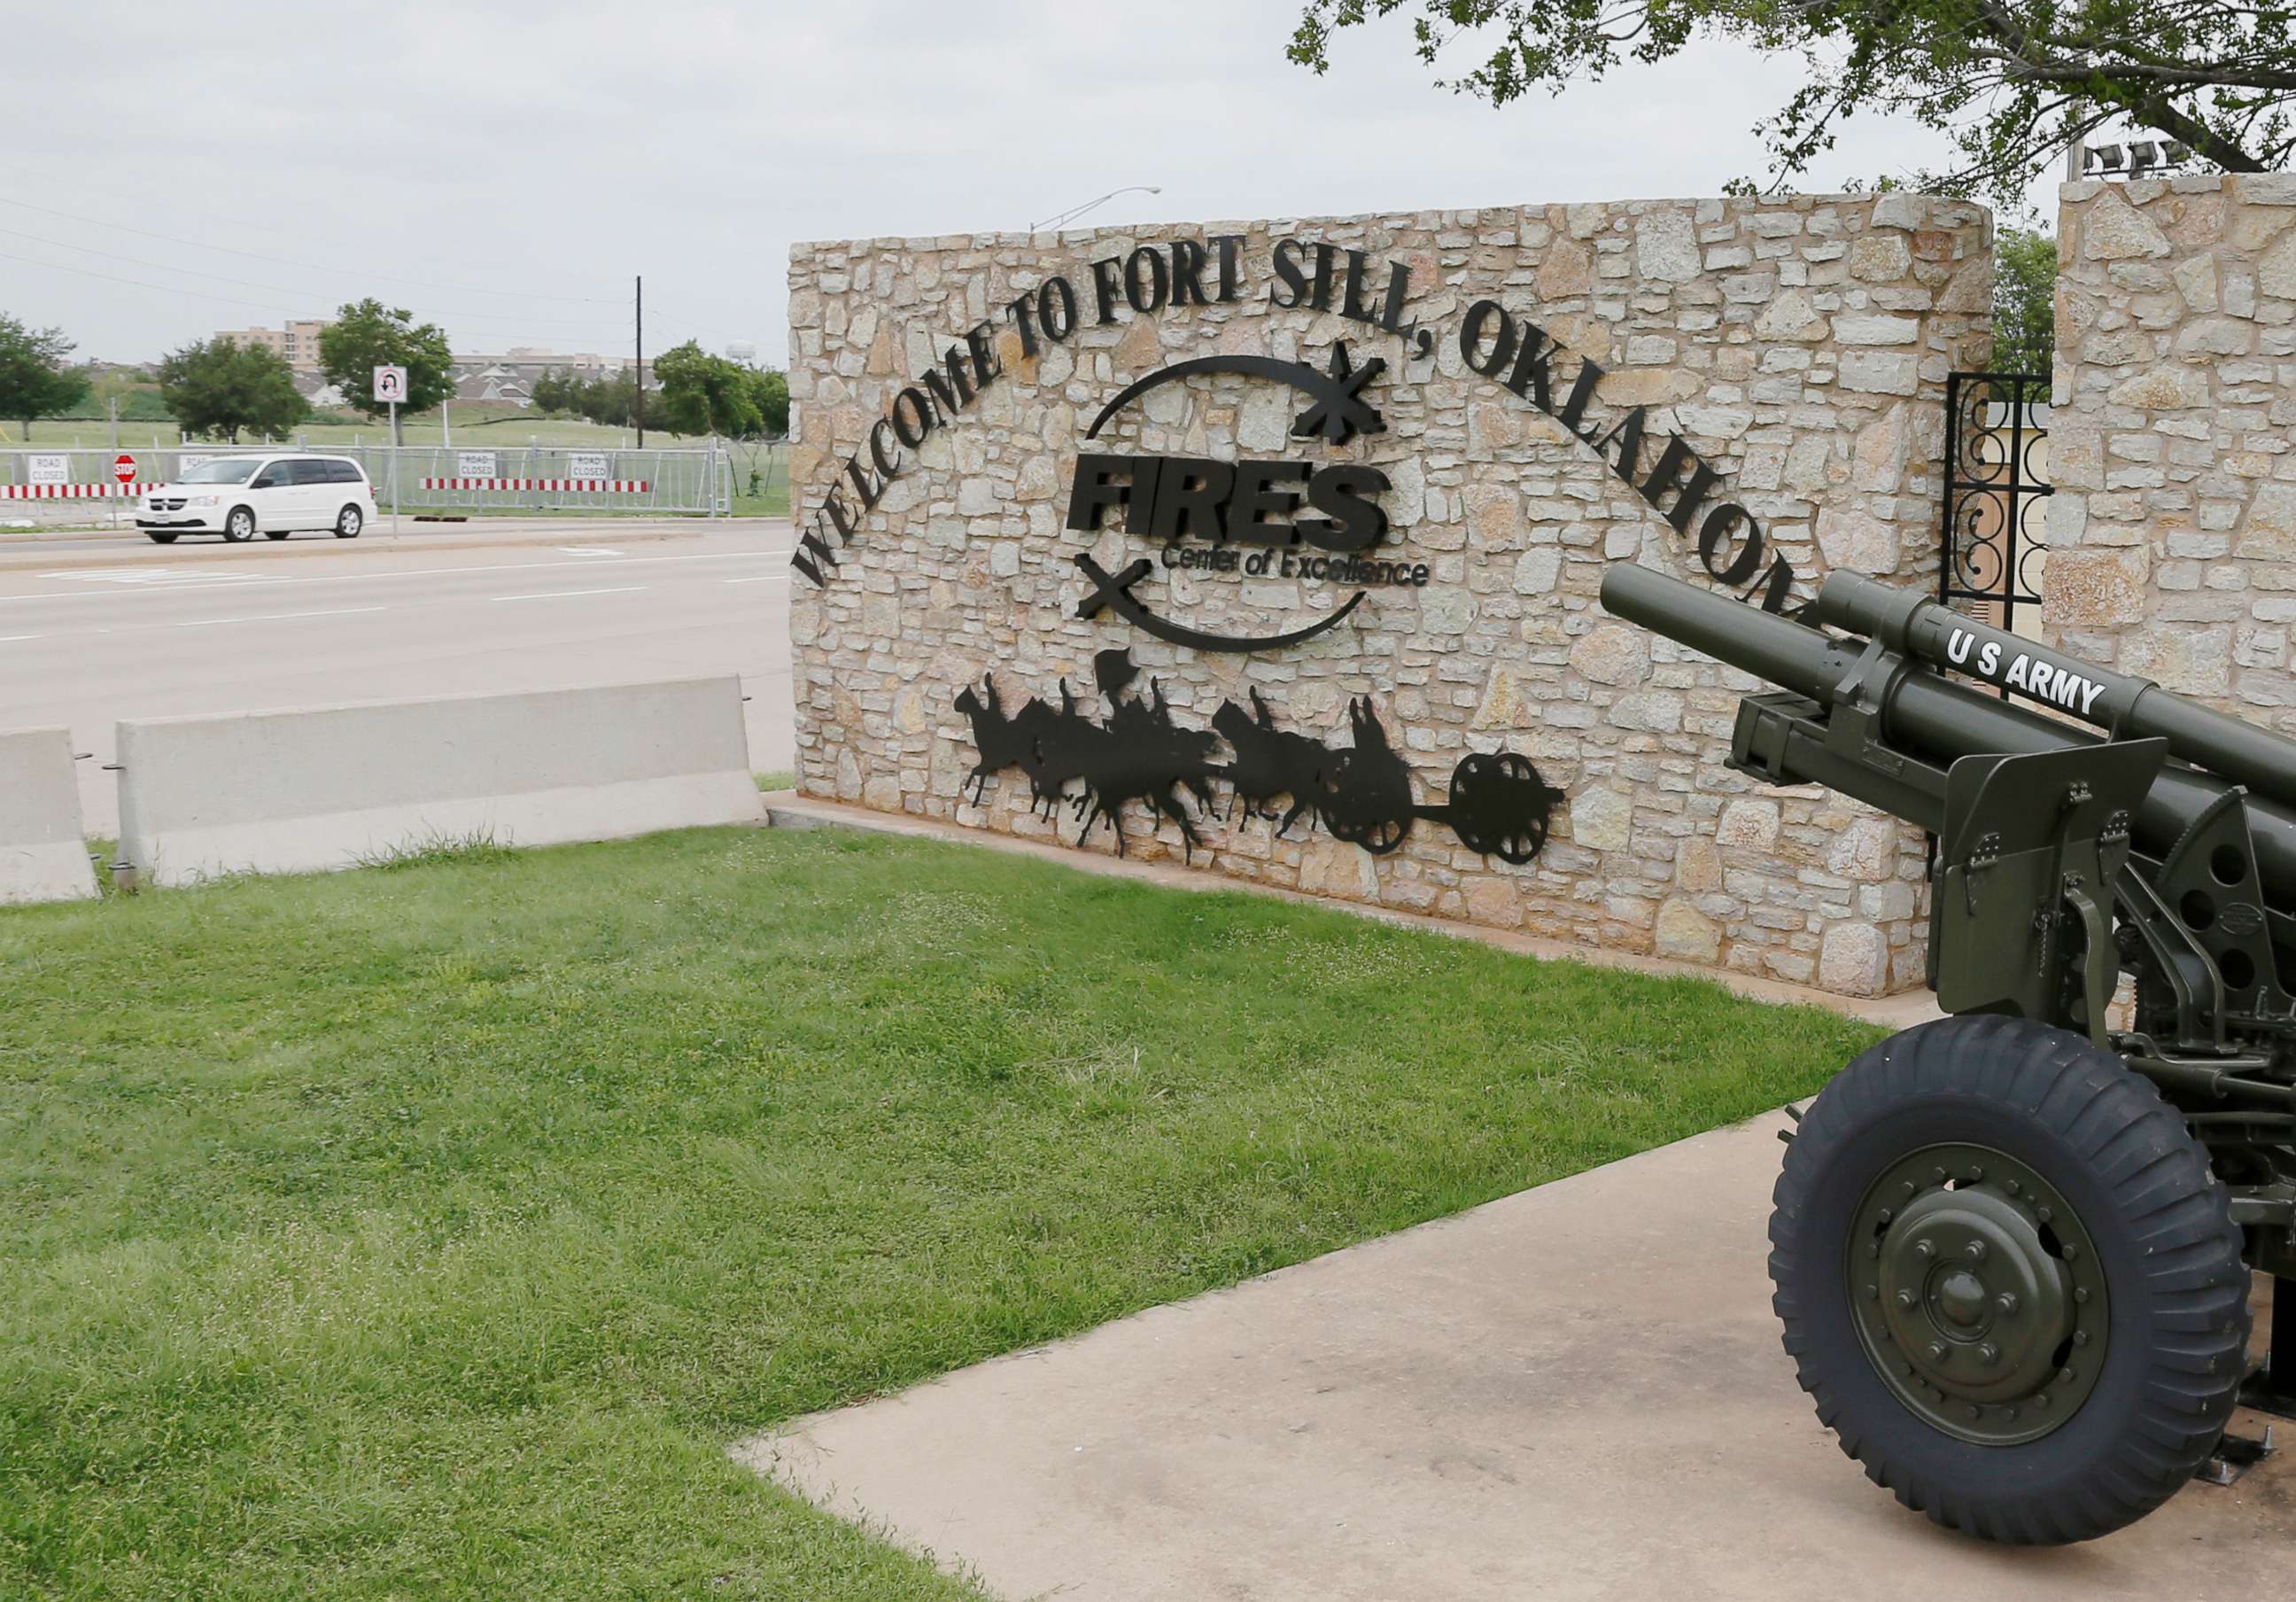 PHOTO: A vehicle drives by a sign at Scott Gate, one of the entrances to Fort Sill, in Fort Sill, Okla., in this June 17, 2014 file photo.